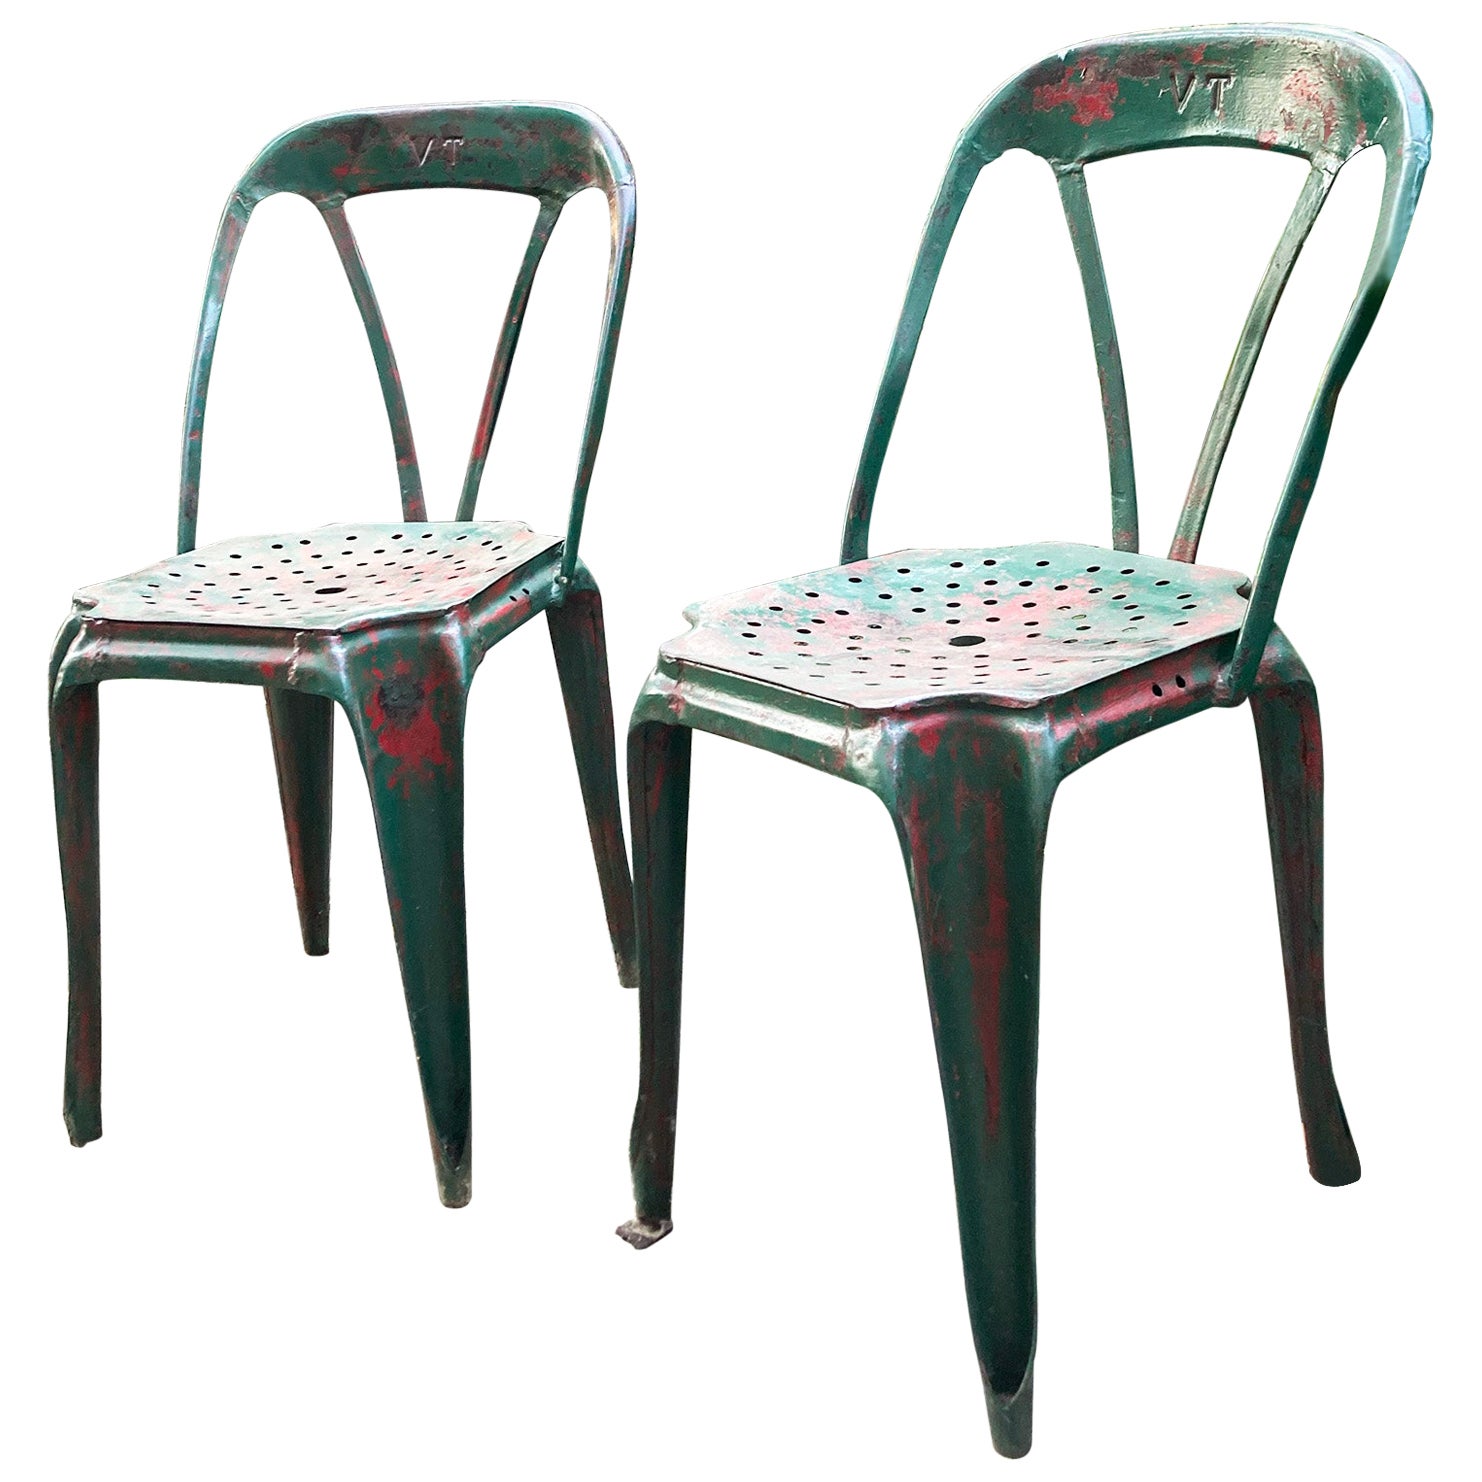 Iconic Metal Chairs by Joseph Mathieu Produced by Pierre Benite, Franche 1940’s For Sale